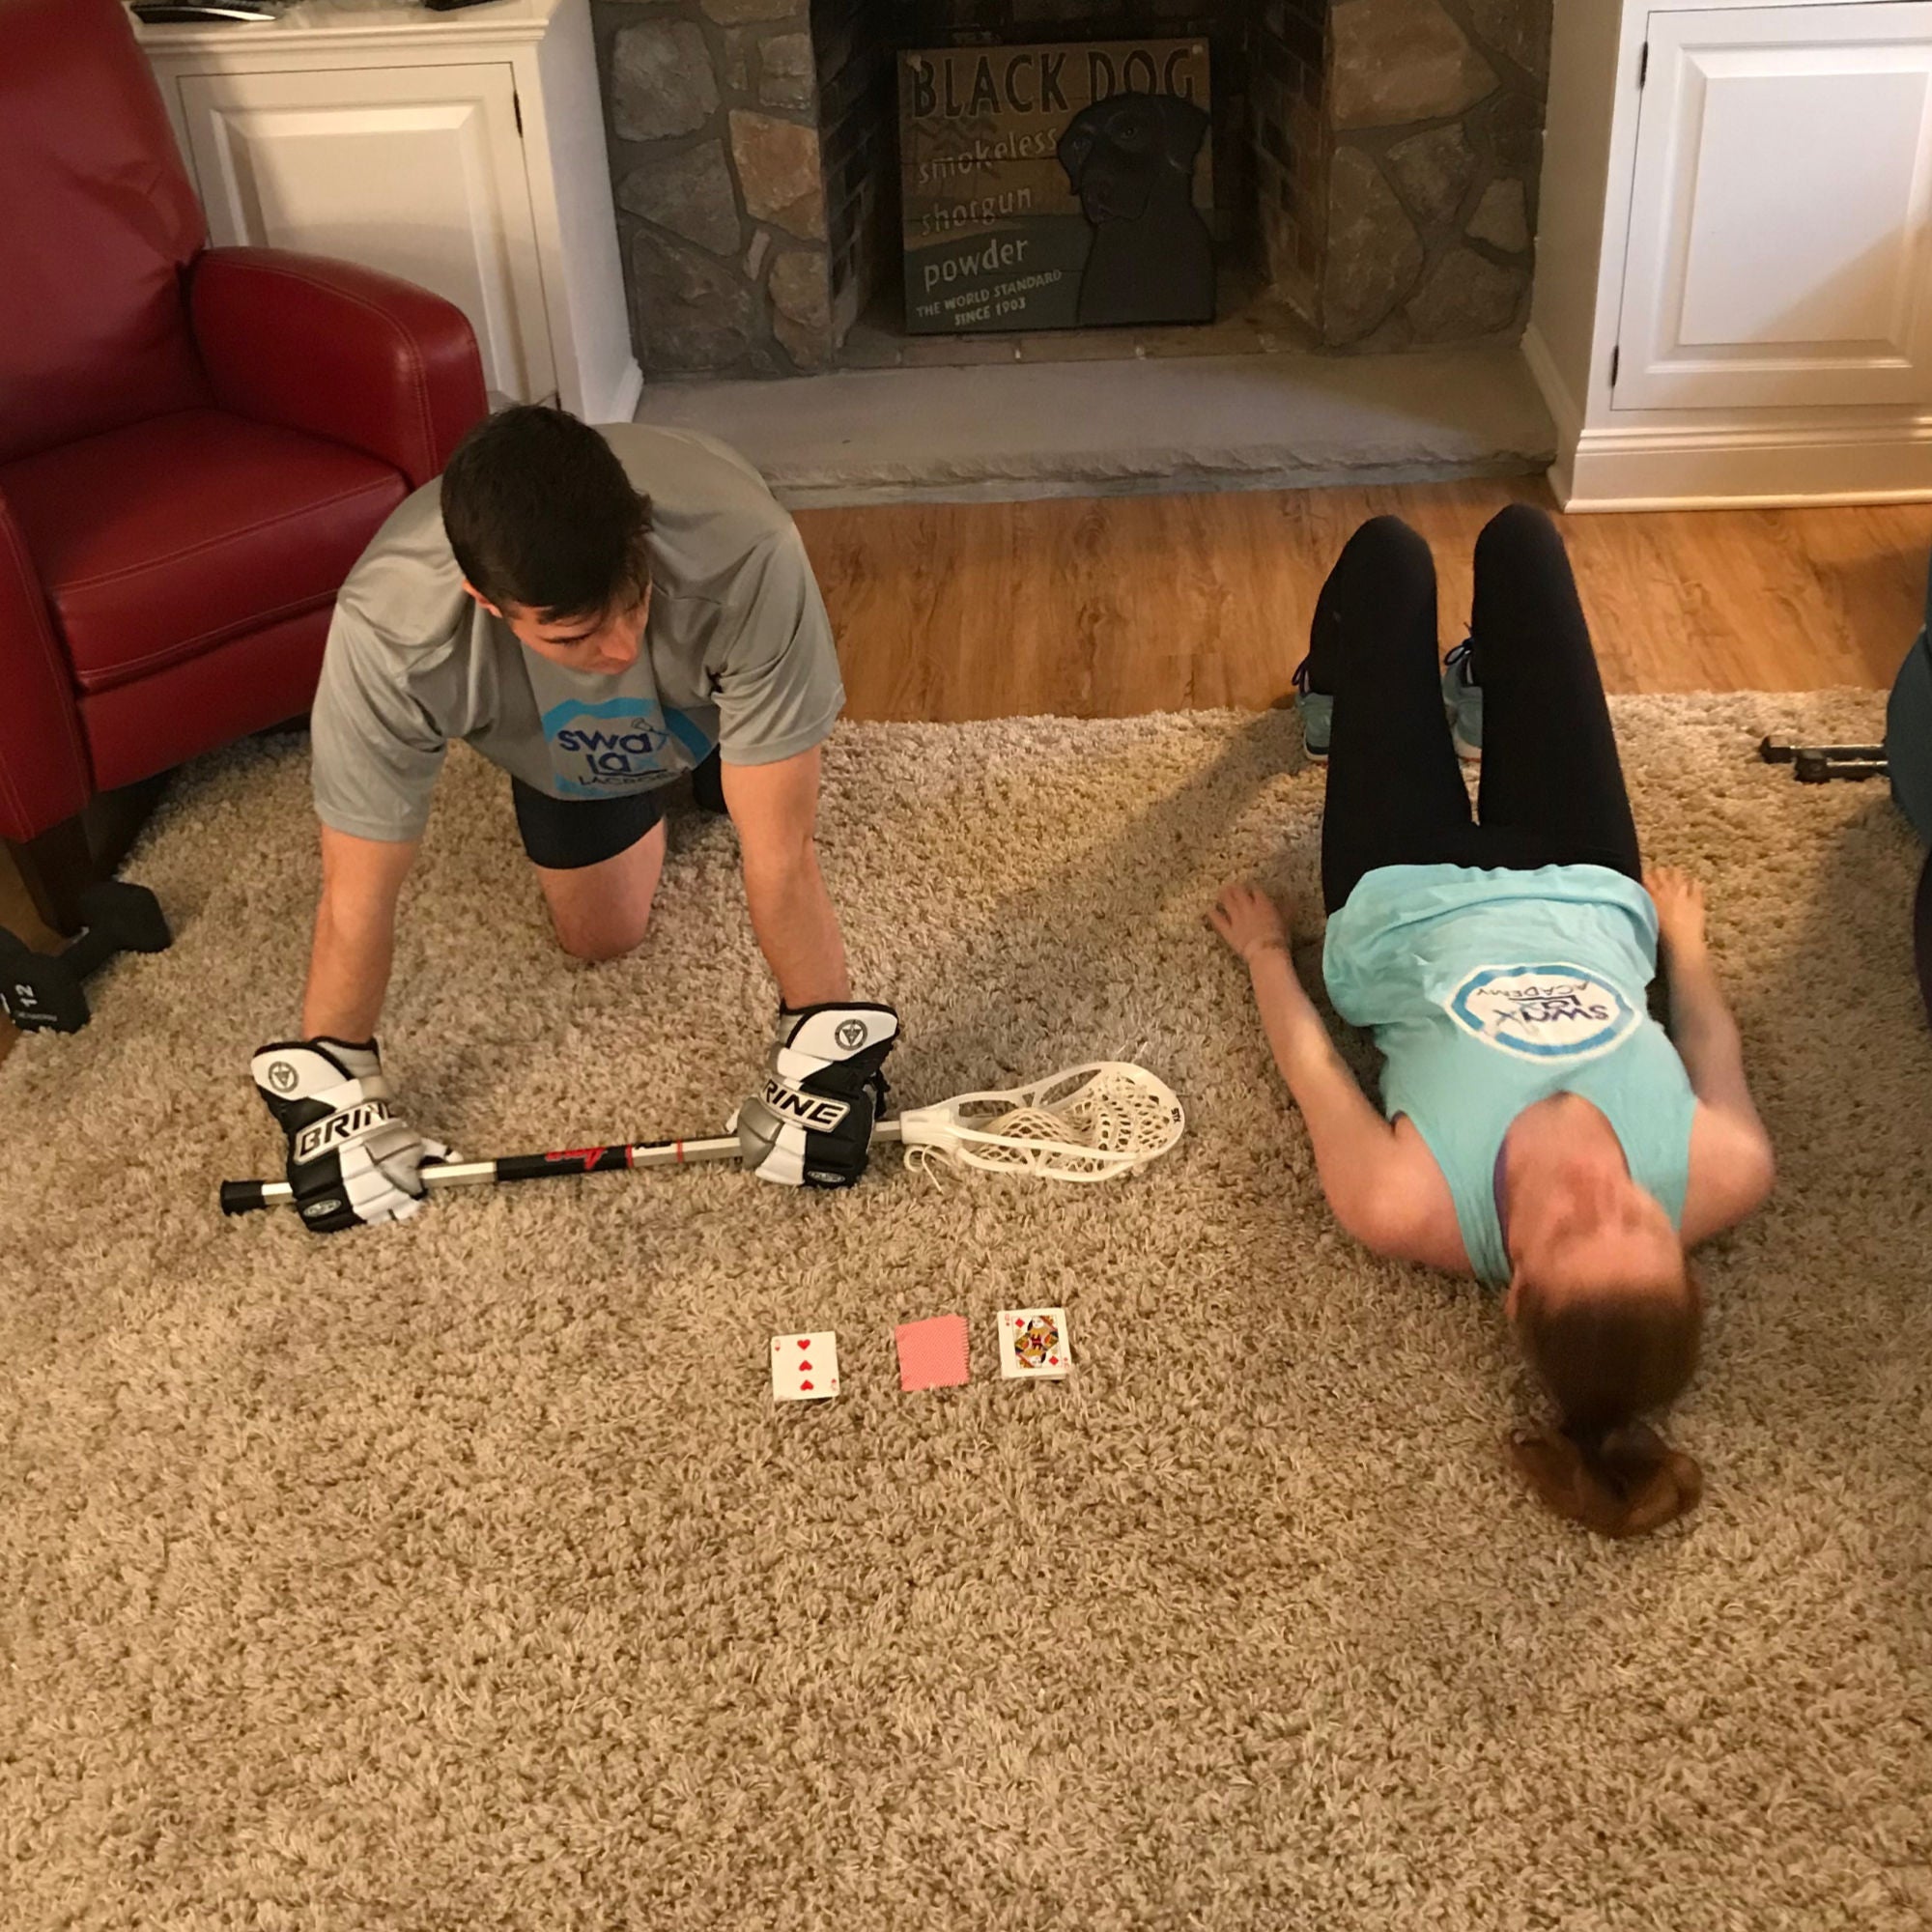 Lacrosse coaches Brian and Liza staying in shape and training using playing cards as prompts